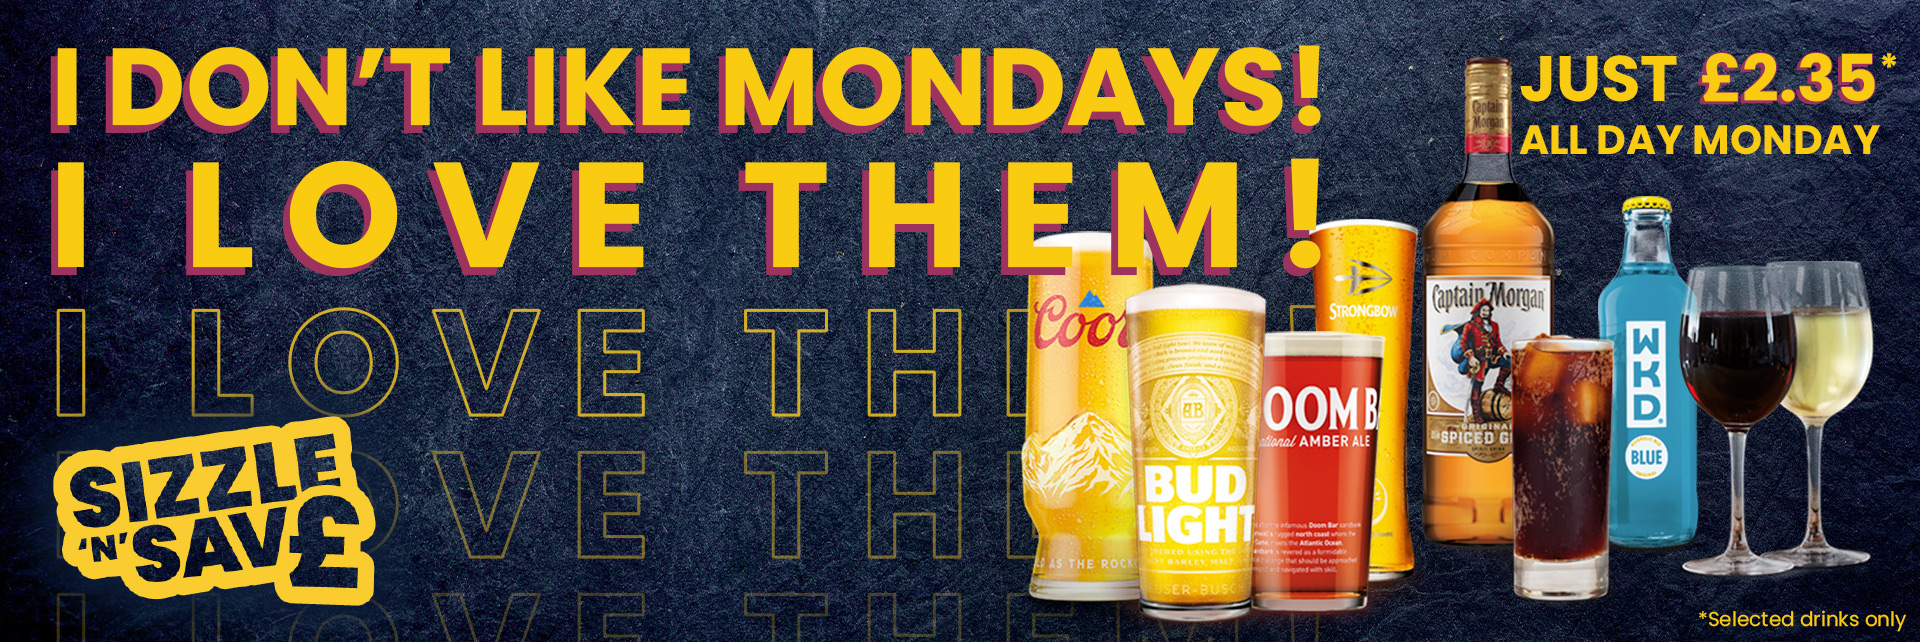 Monday Club at Fox & Hounds